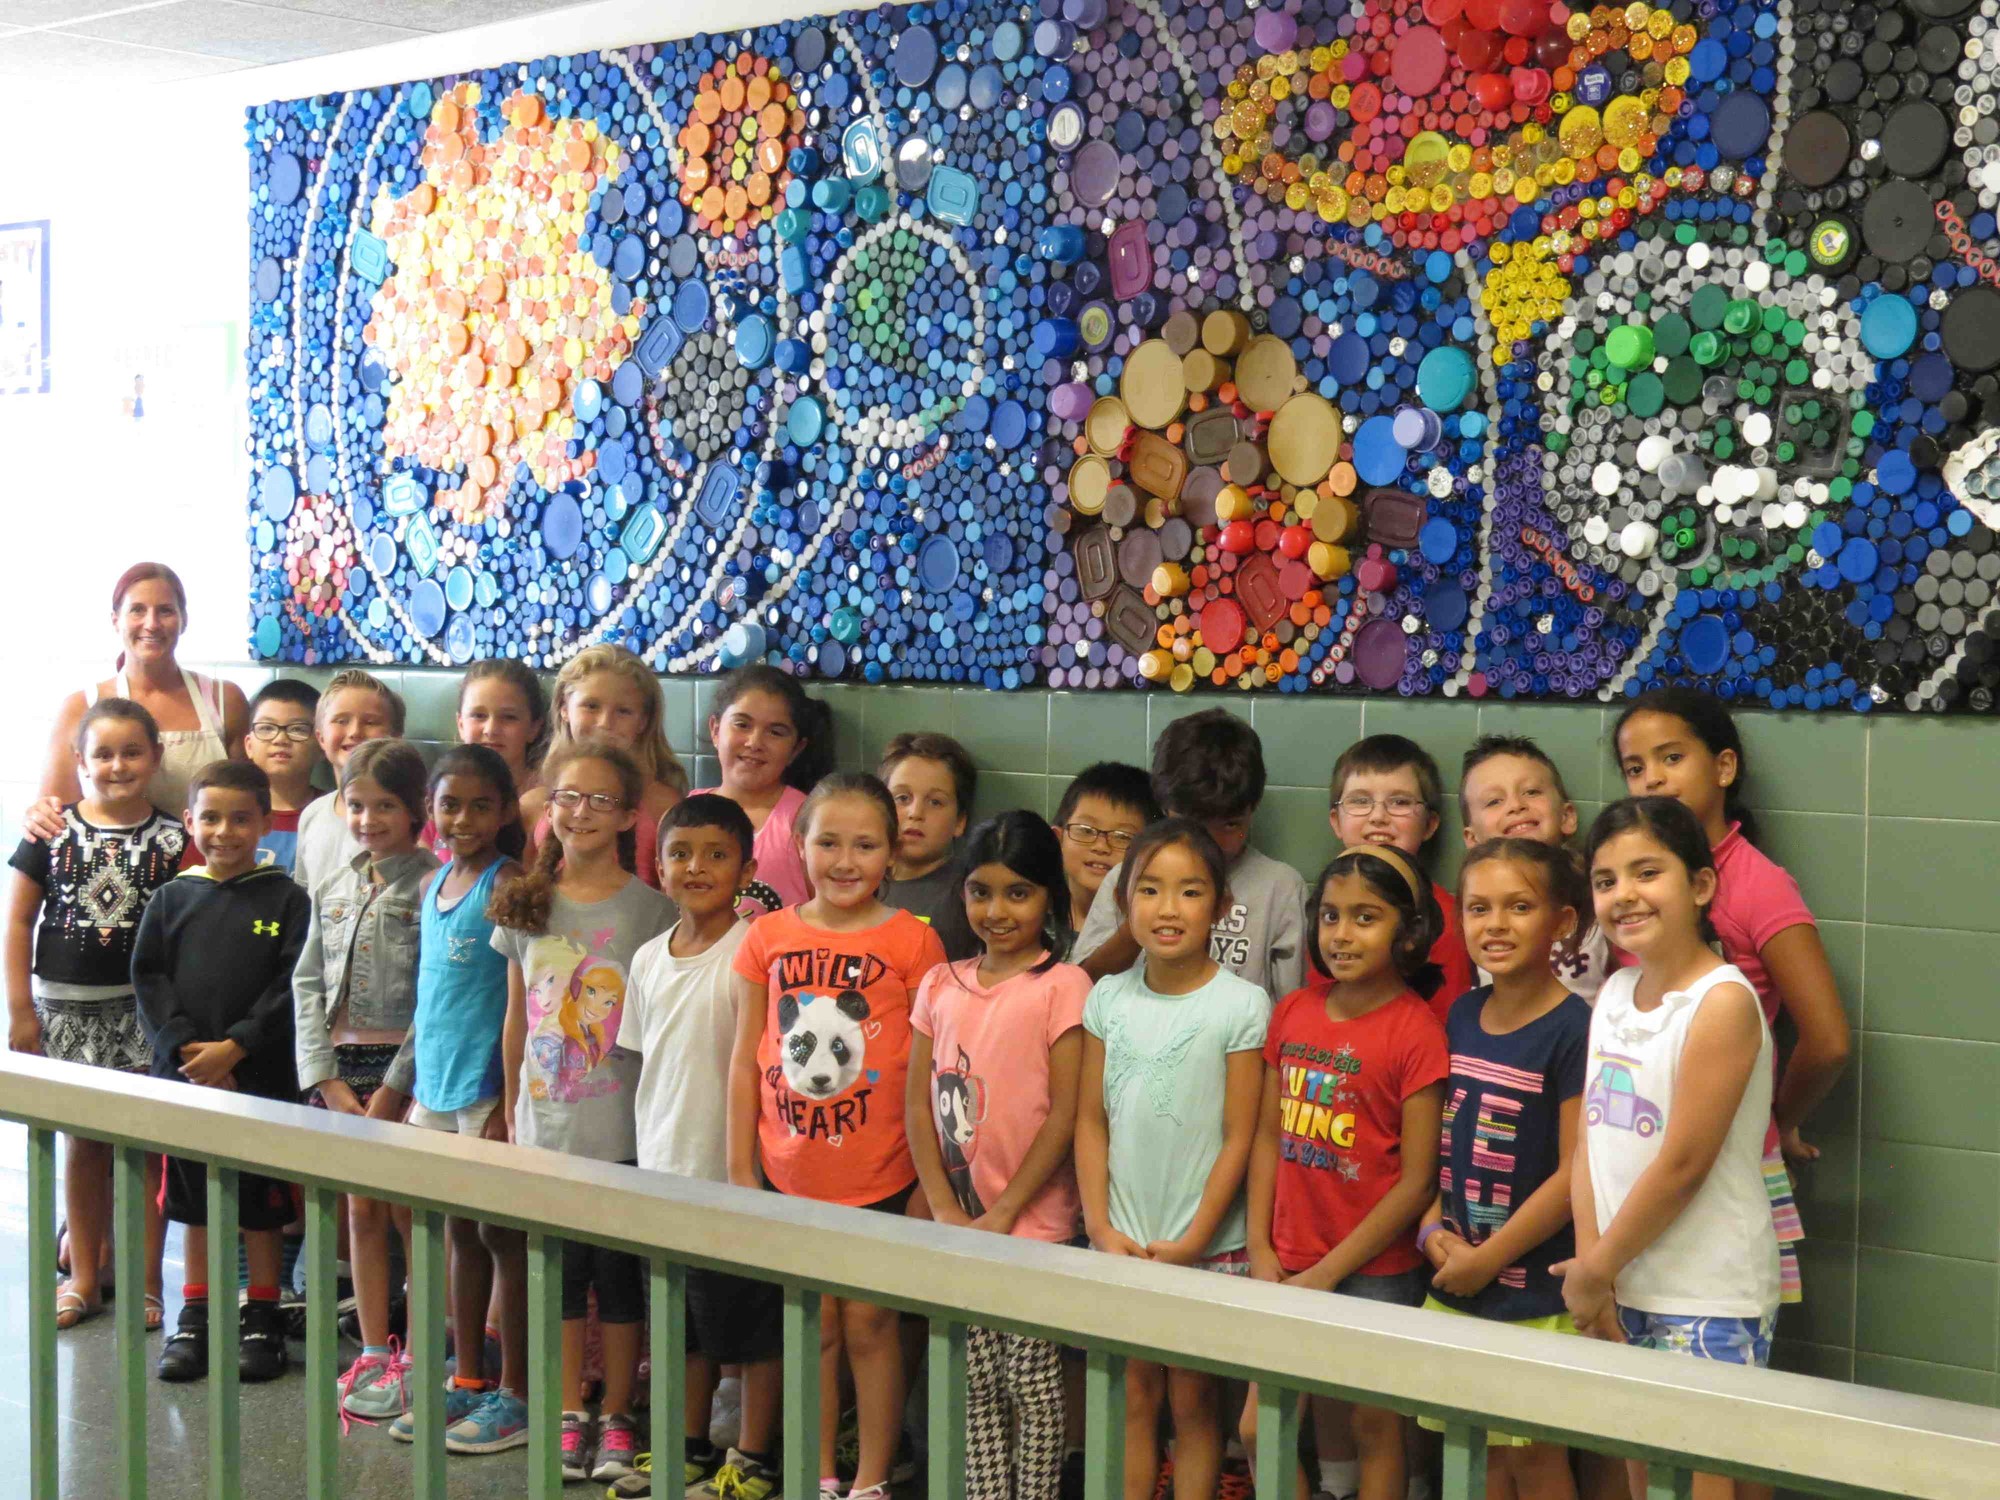 Parkway Elementary School’s fifth-grade art club created the mural of the galaxy using bottle caps.